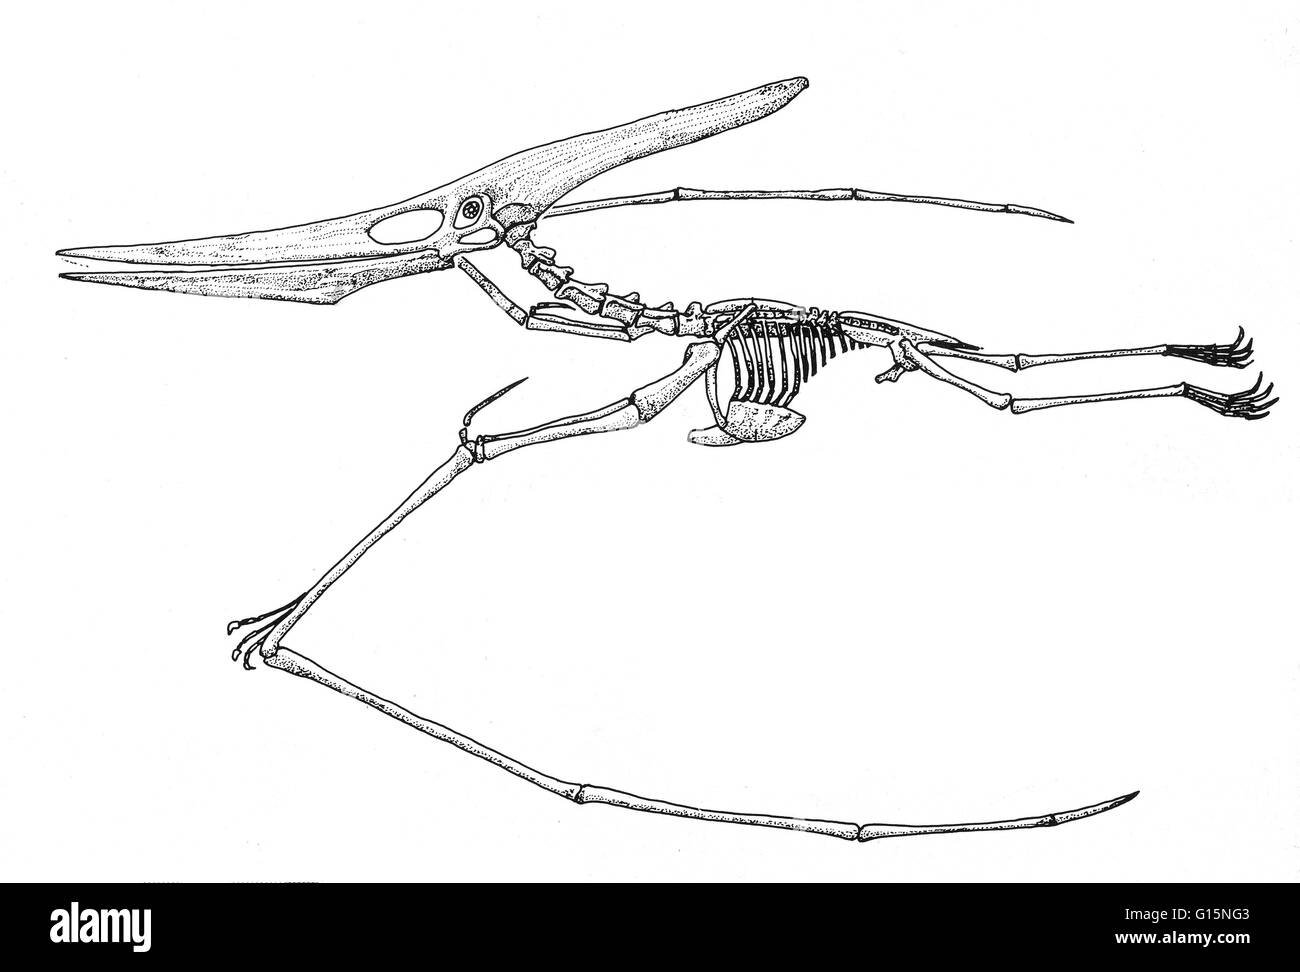 Pteranodon is a genus of pterosaurs which included some of the largest known flying reptiles, with wingspans over 20 feet. It existed during the late Cretaceous geological period of North America in present day Kansas, Alabama, Nebraska, Wyoming, and Sout Stock Photo